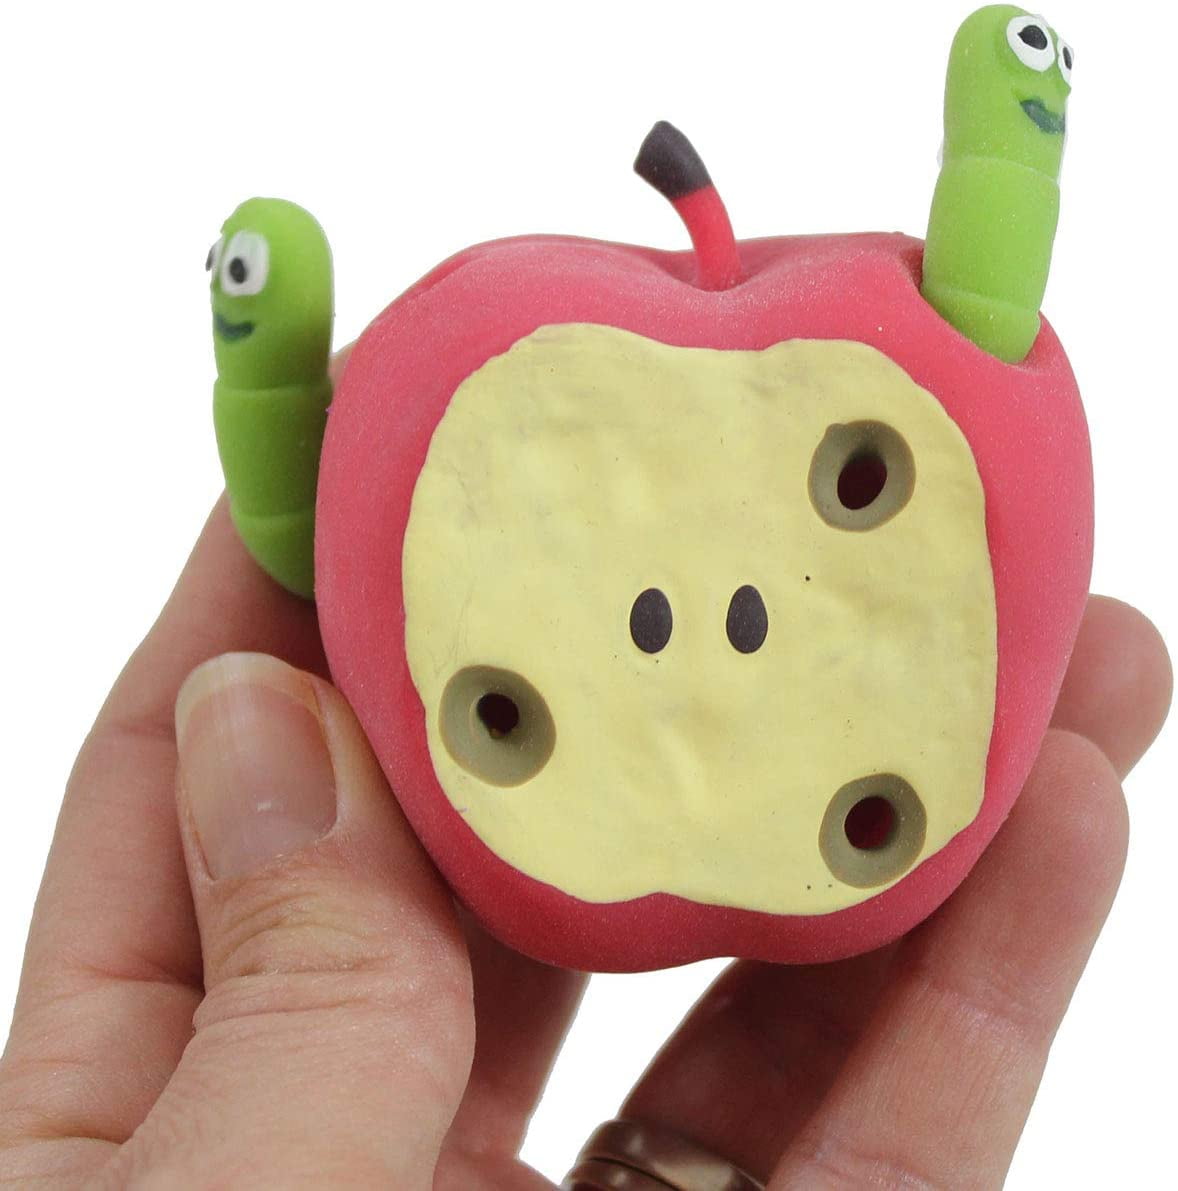 Calming Autism Sensory Toys Fidget Stress Reliever Stretchy Apple & Worms ADHD 